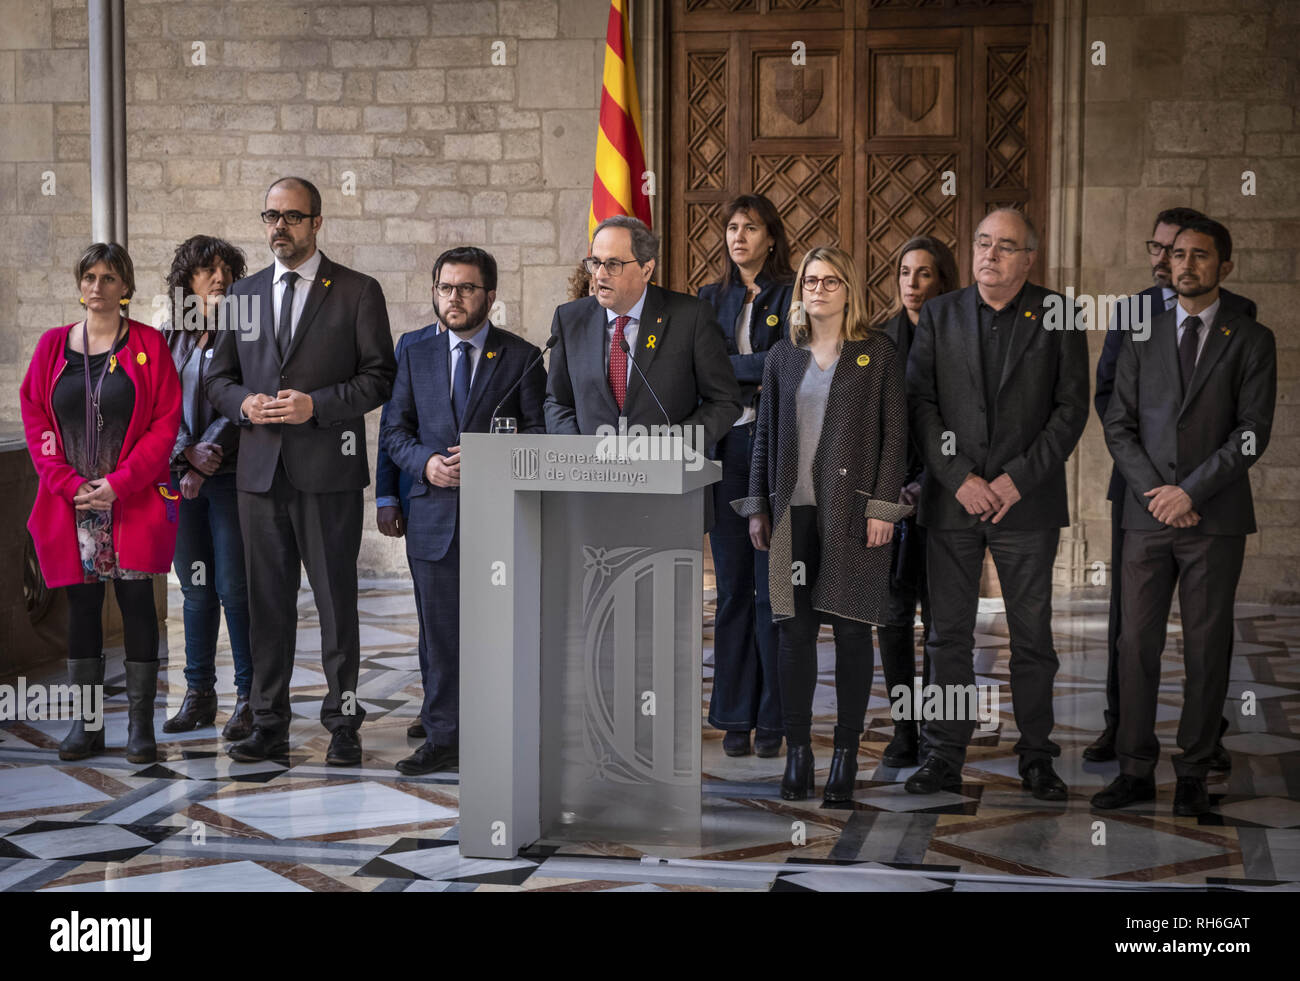 February 1, 2019 - Barcelona, Catalonia, Spain - President Quim Torra is seen during the institutional declaration of the transfer of political prisoners to Madrid to be tried..President Quim Torra during the declaration has asked the international community and all entities of civil and human rights to add to the sentiment of the people of Catalonia in defense of the principles and values of a fairer, safer and freer future world. (Credit Image: © Paco Freire/SOPA Images via ZUMA Wire) Stock Photo